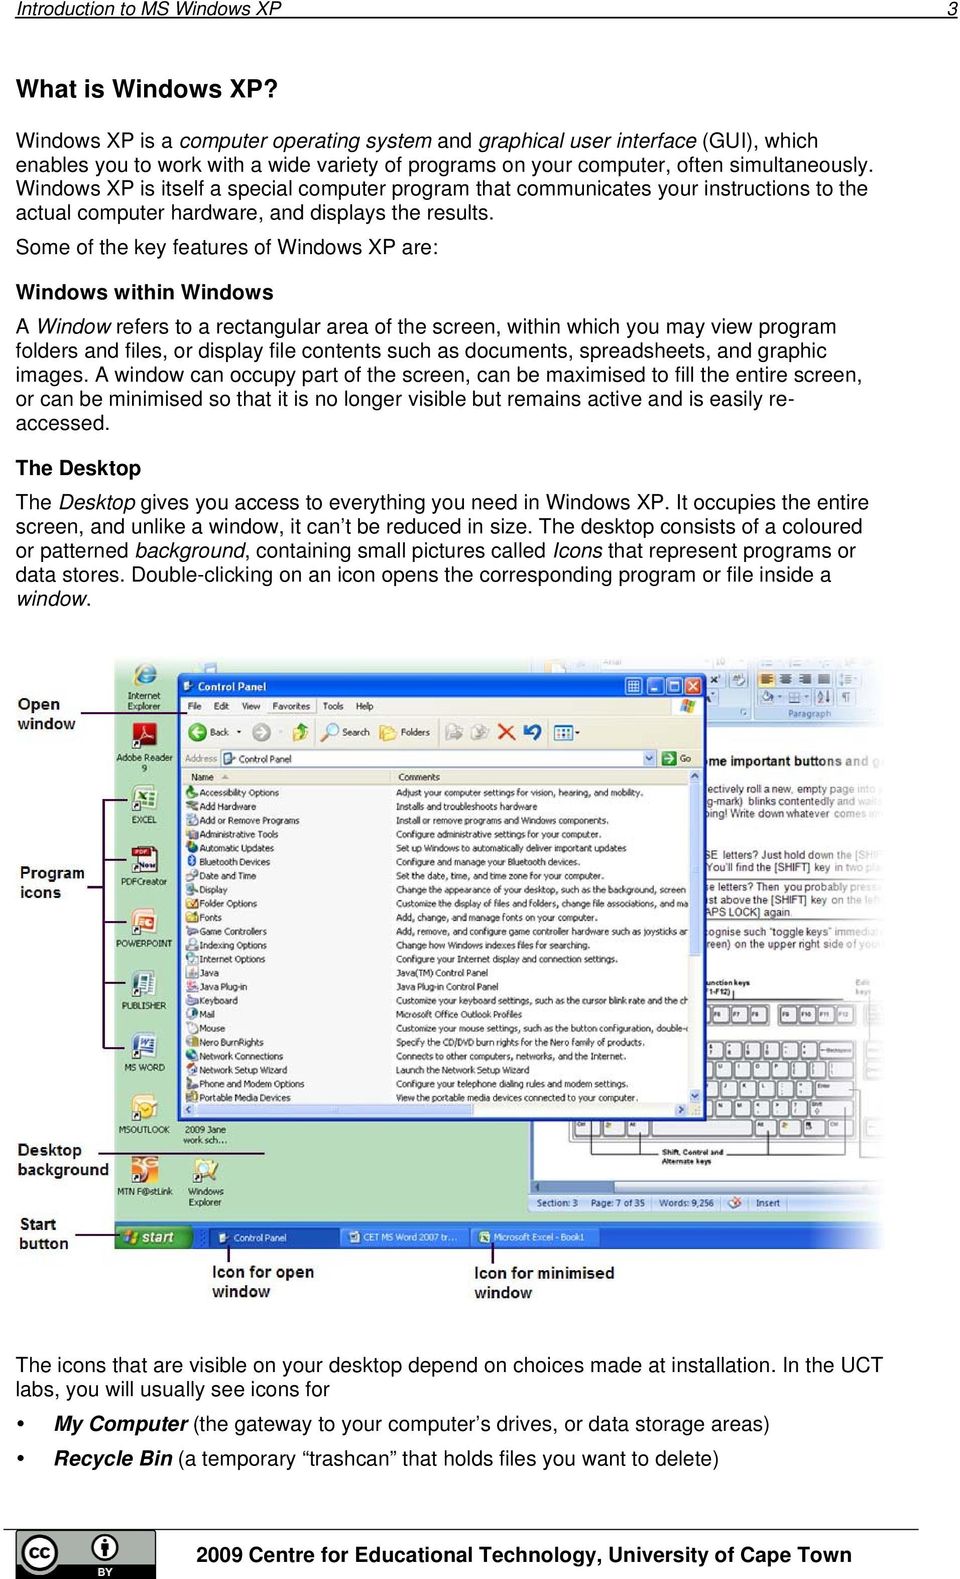 Windows XP is itself a special computer program that communicates your instructions to the actual computer hardware, and displays the results.